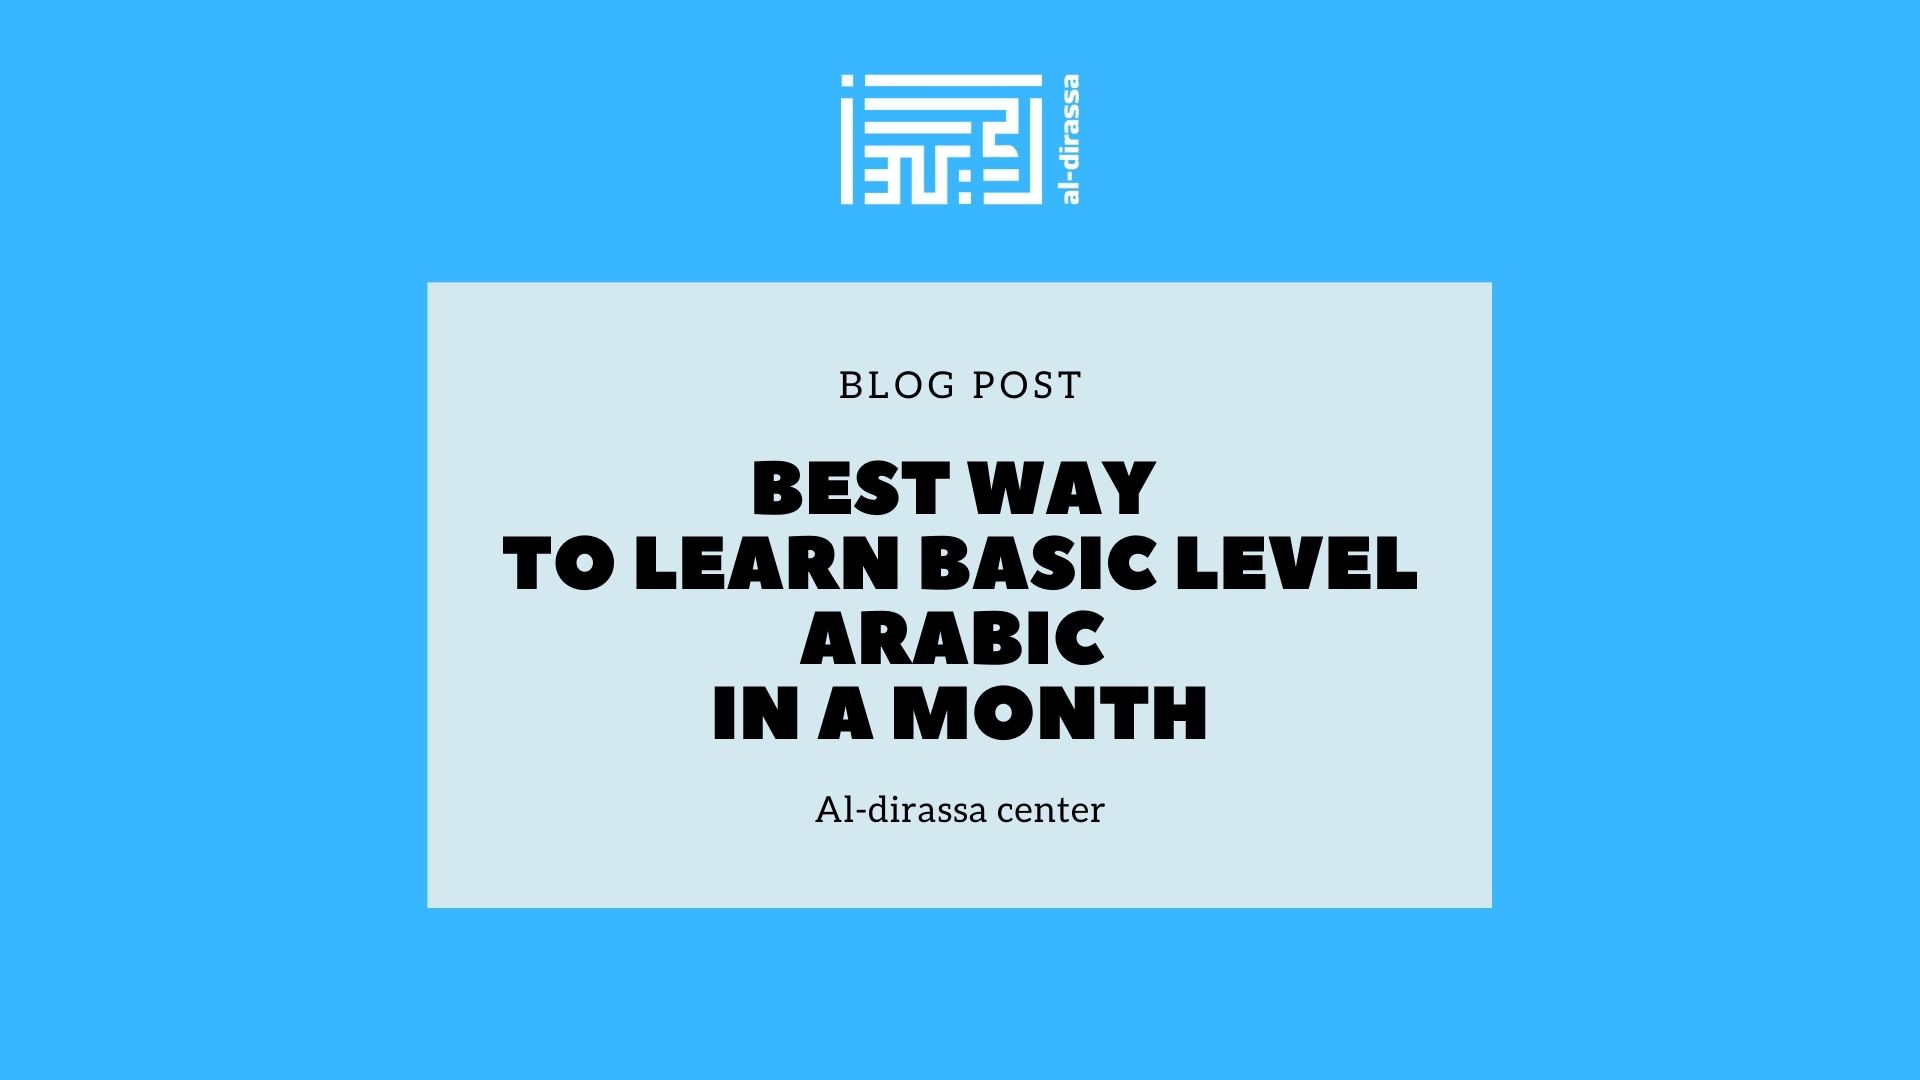 Best Way to Learn Basic Level Arabic in a month